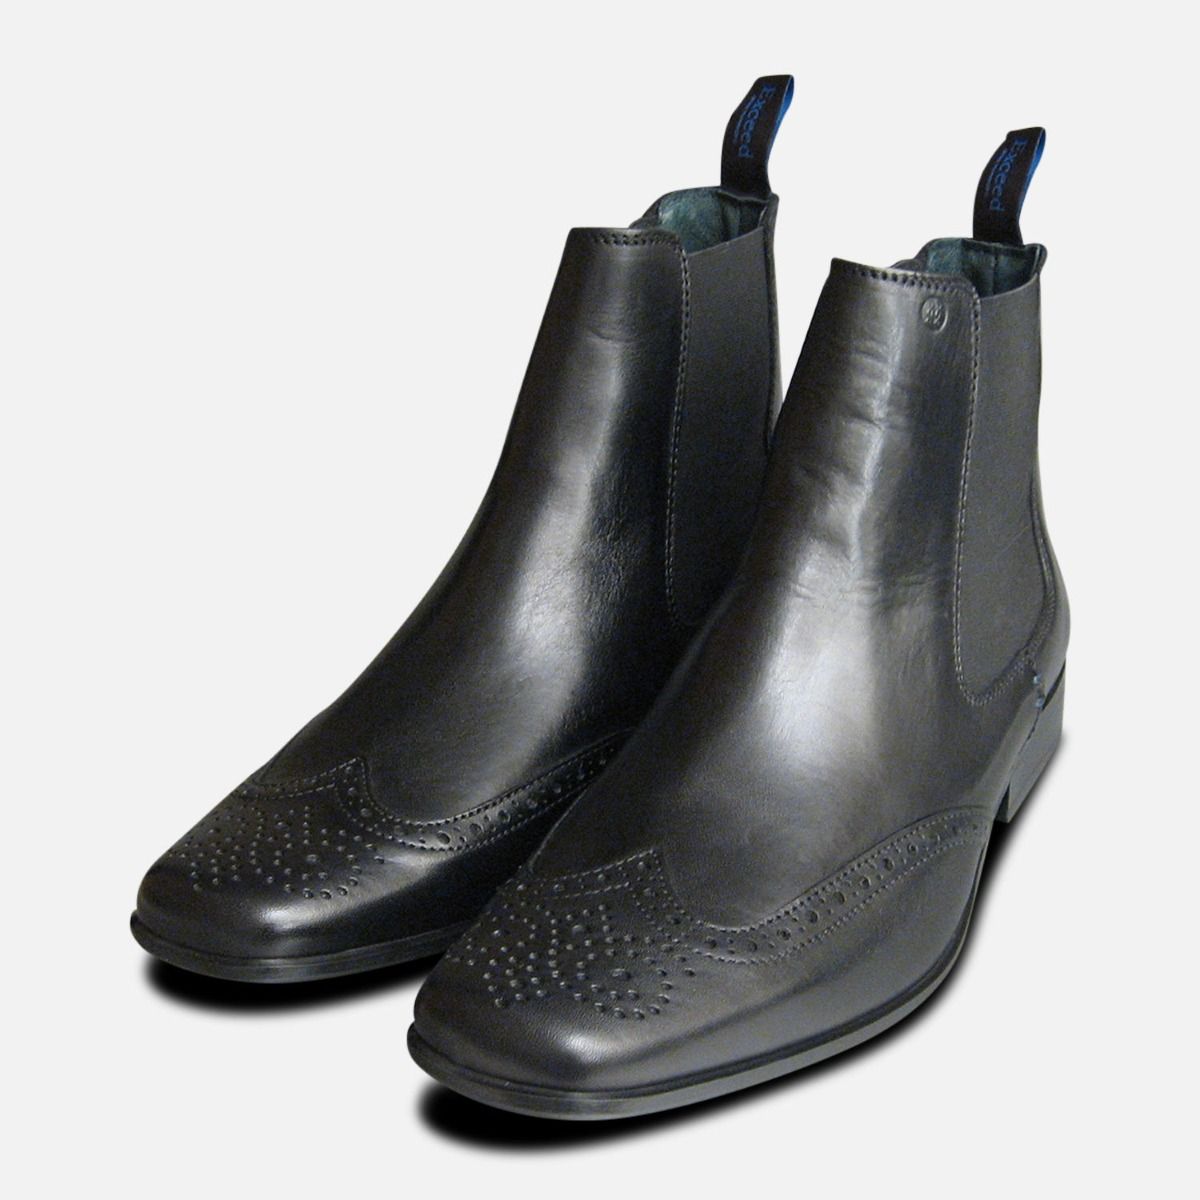 Exceed Black Brogue Mens Chelsea Boots